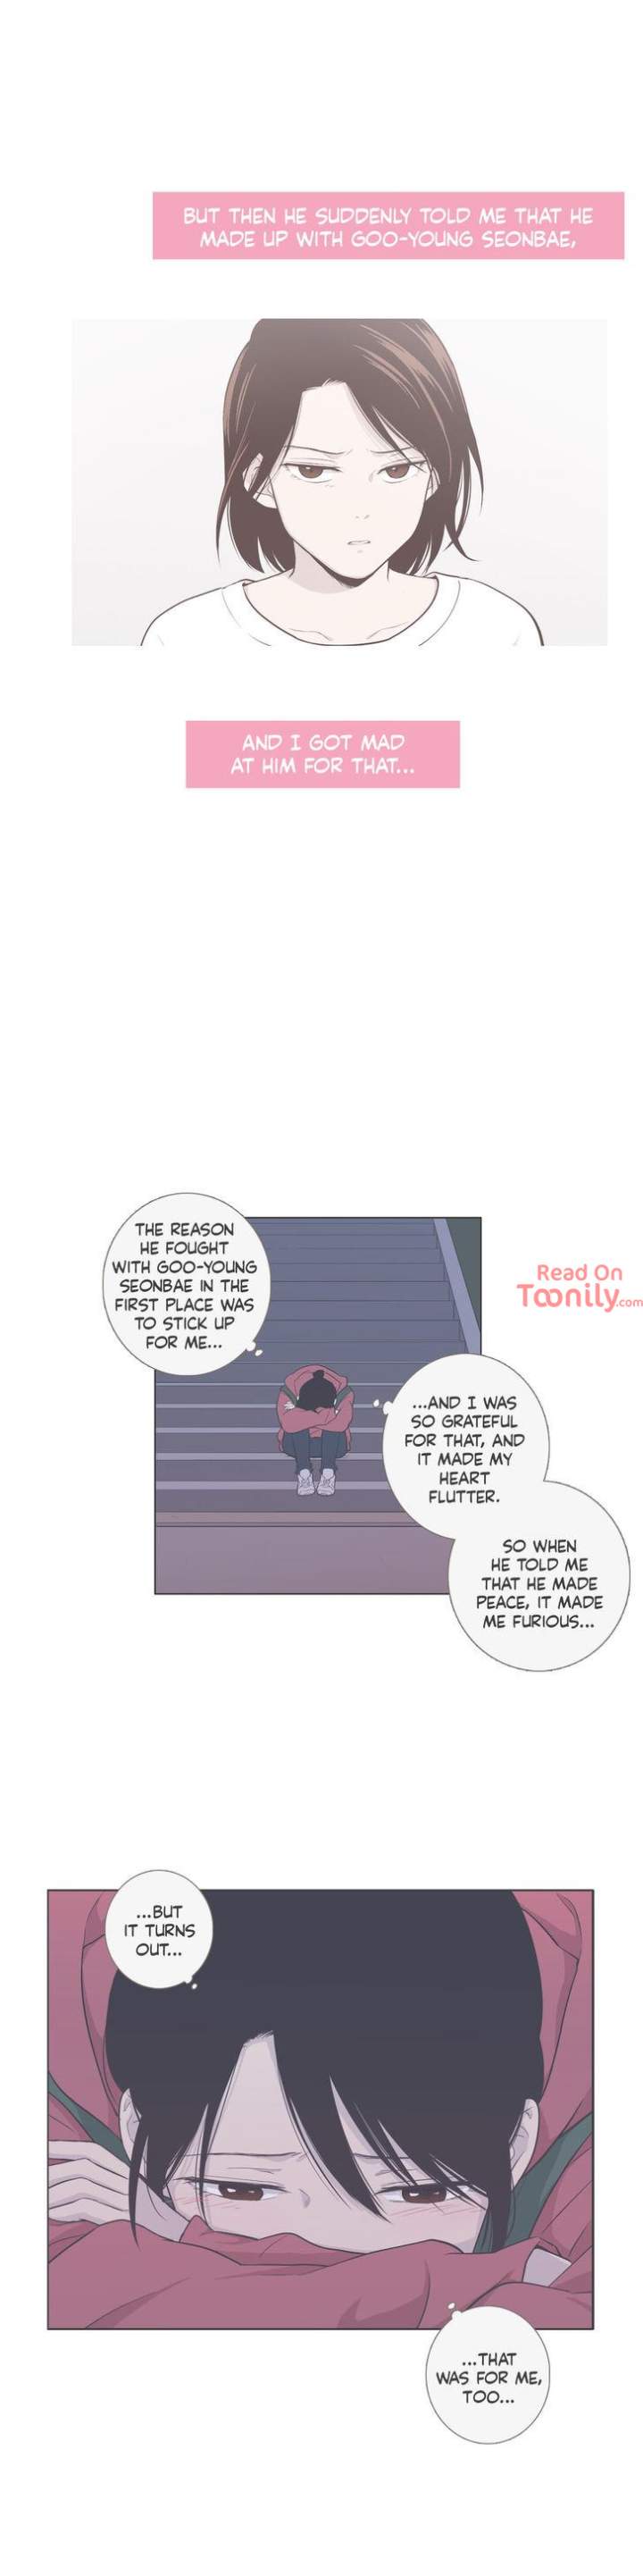 Something About Us - Chapter 63 Page 4